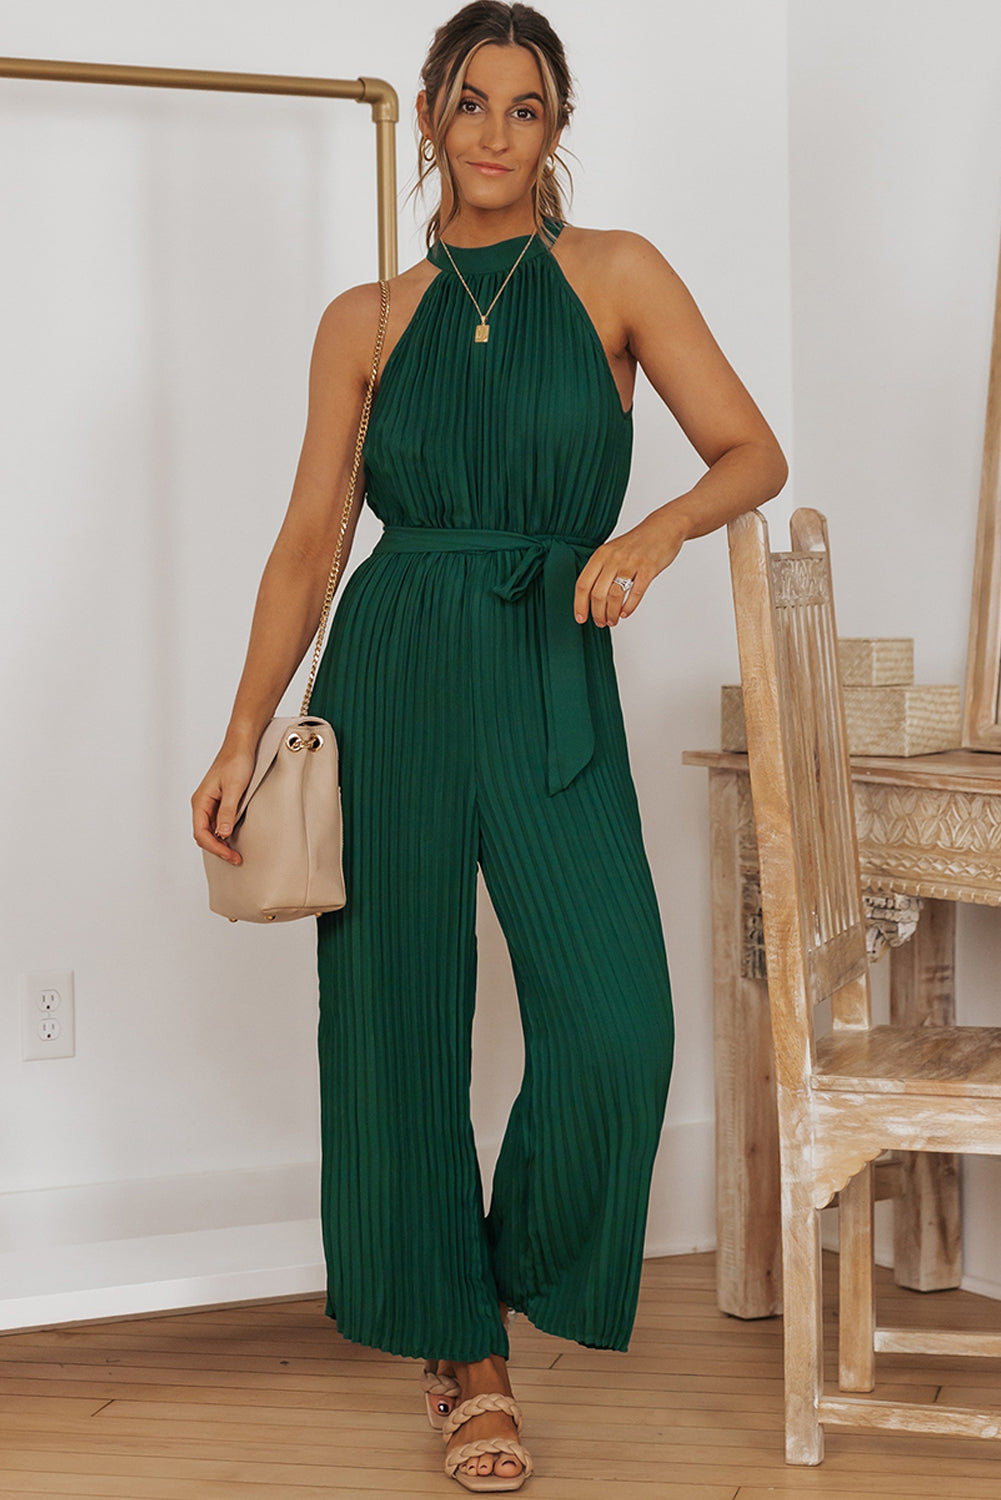 Accordion Pleated Belted Grecian Neck Sleeveless Jumpsuit - SELFTRITSS